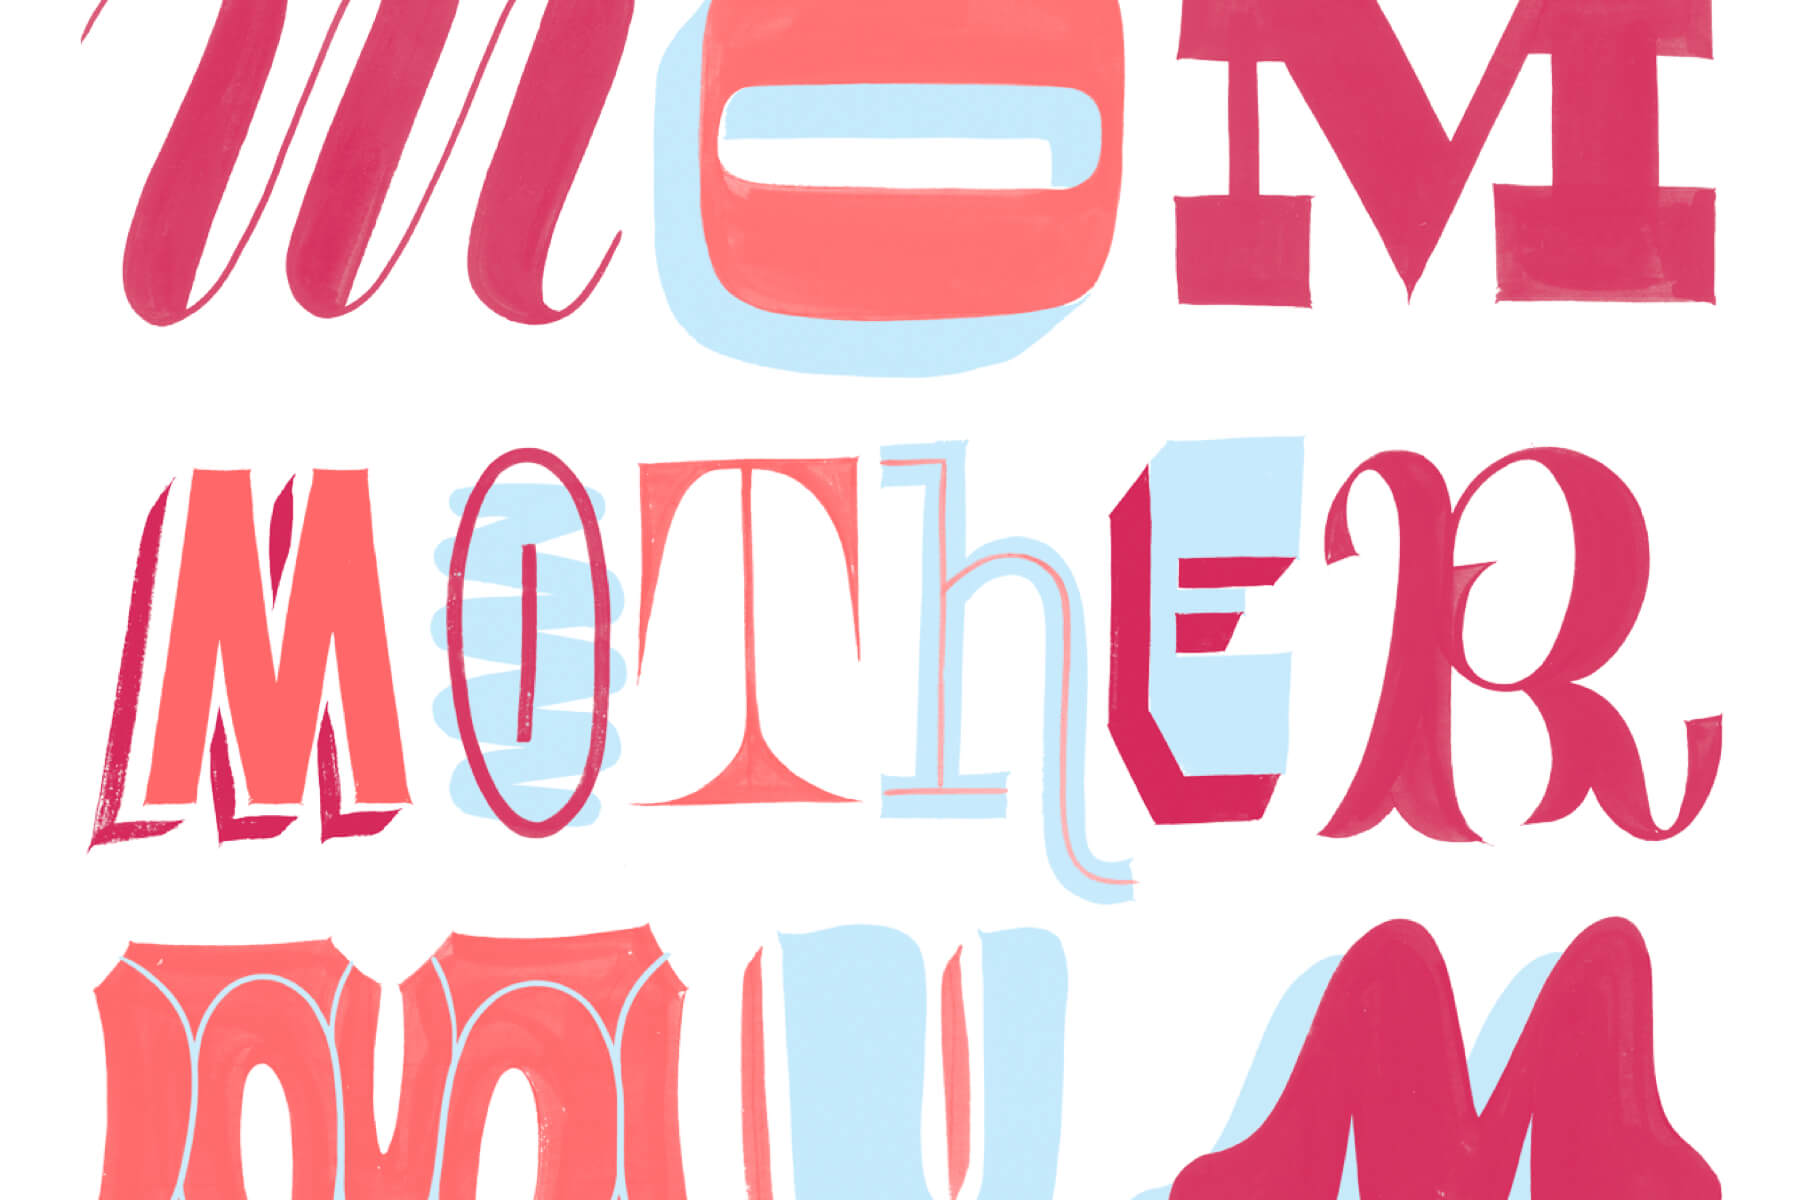 Mother's Day Messages: What to Write in a Mother's Day Card